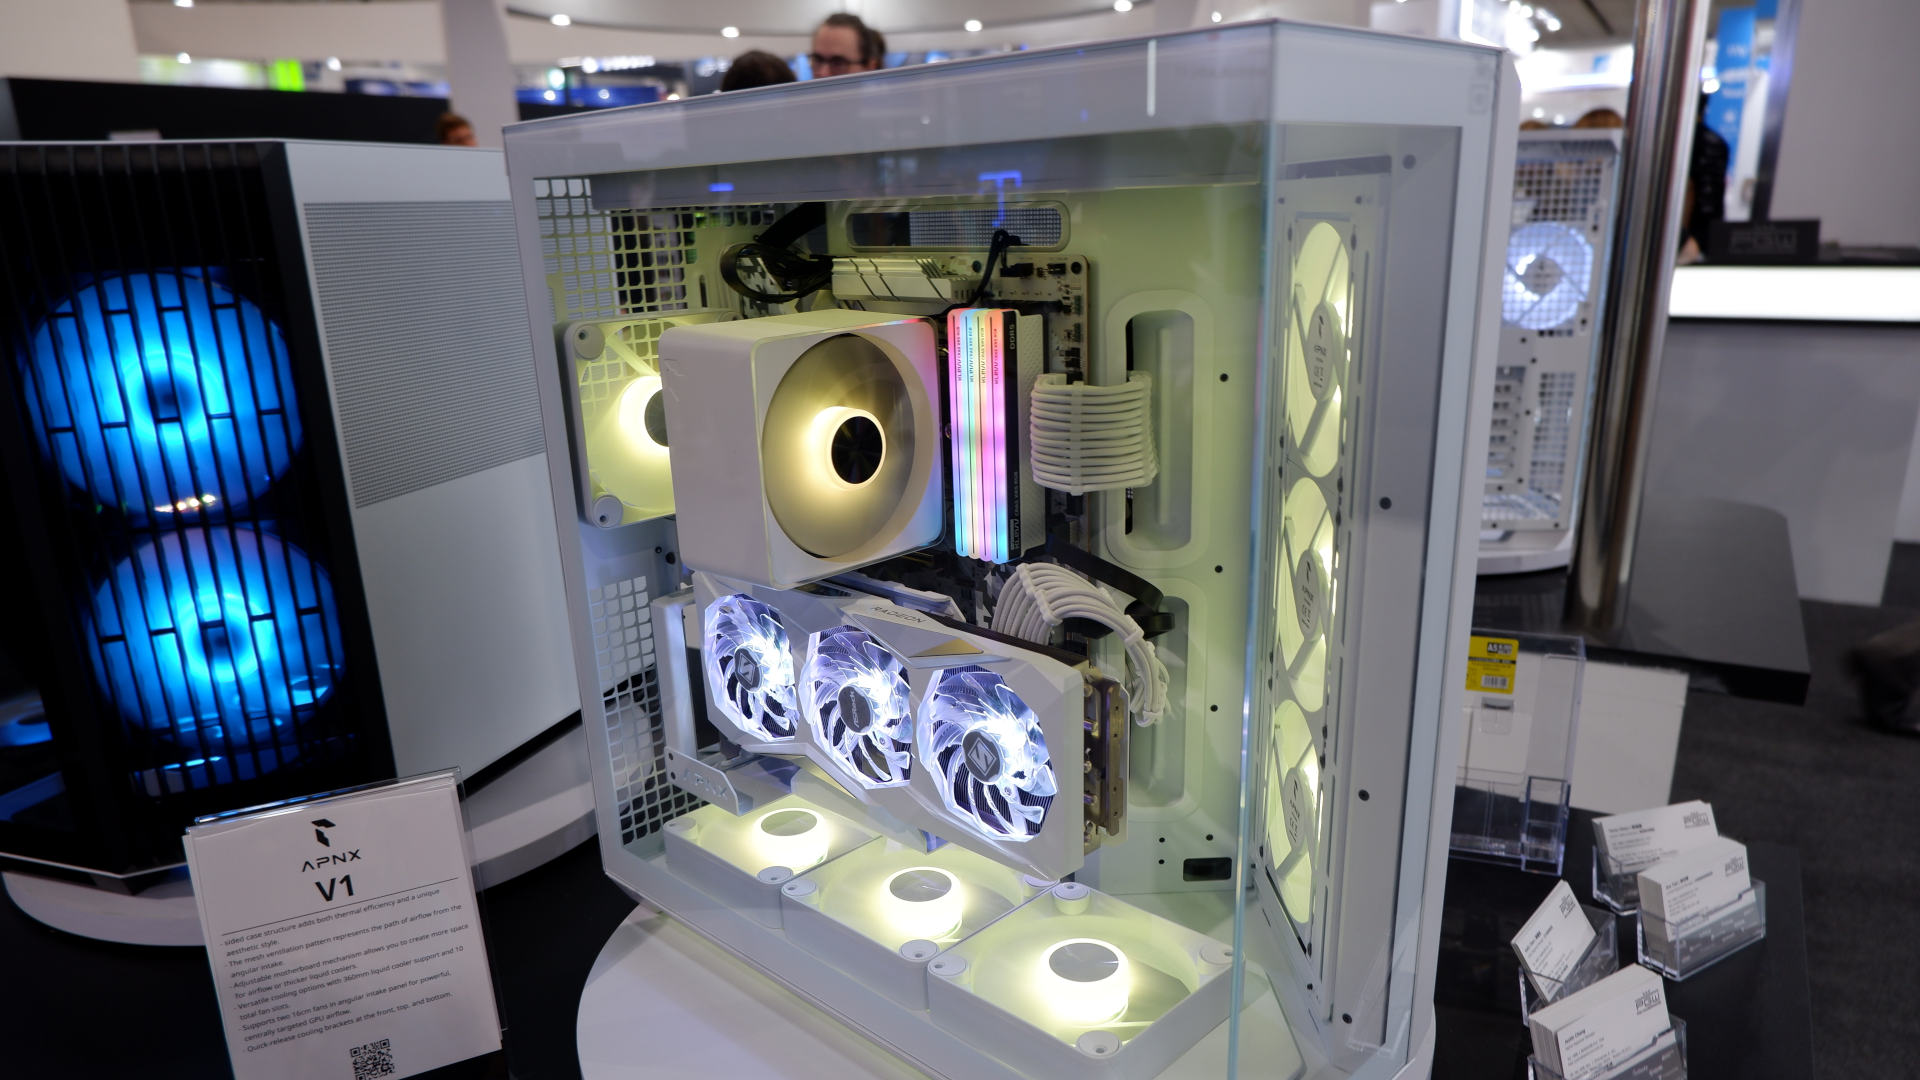 An Aercool PC case, demonstrating the use of the Apnx AP1-V CPU cooler, on display at Computex